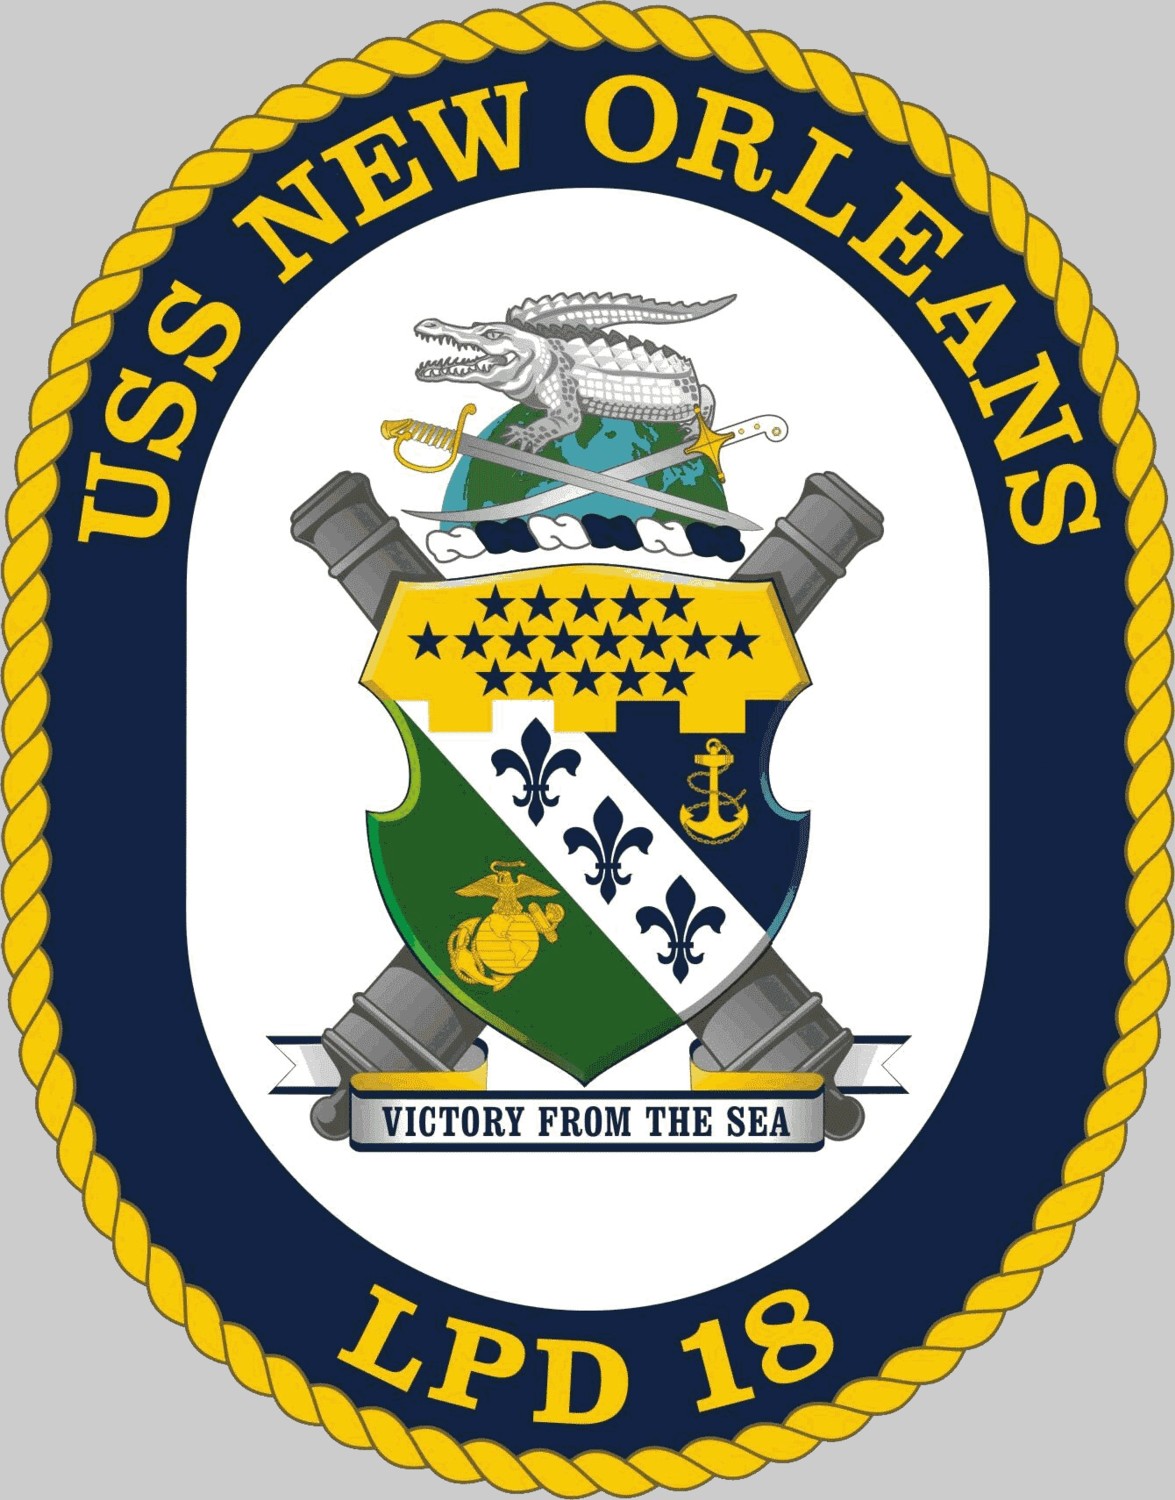 lpd-18 uss new orleans insignia crest patch badge amphibious transport dock us navy 02x